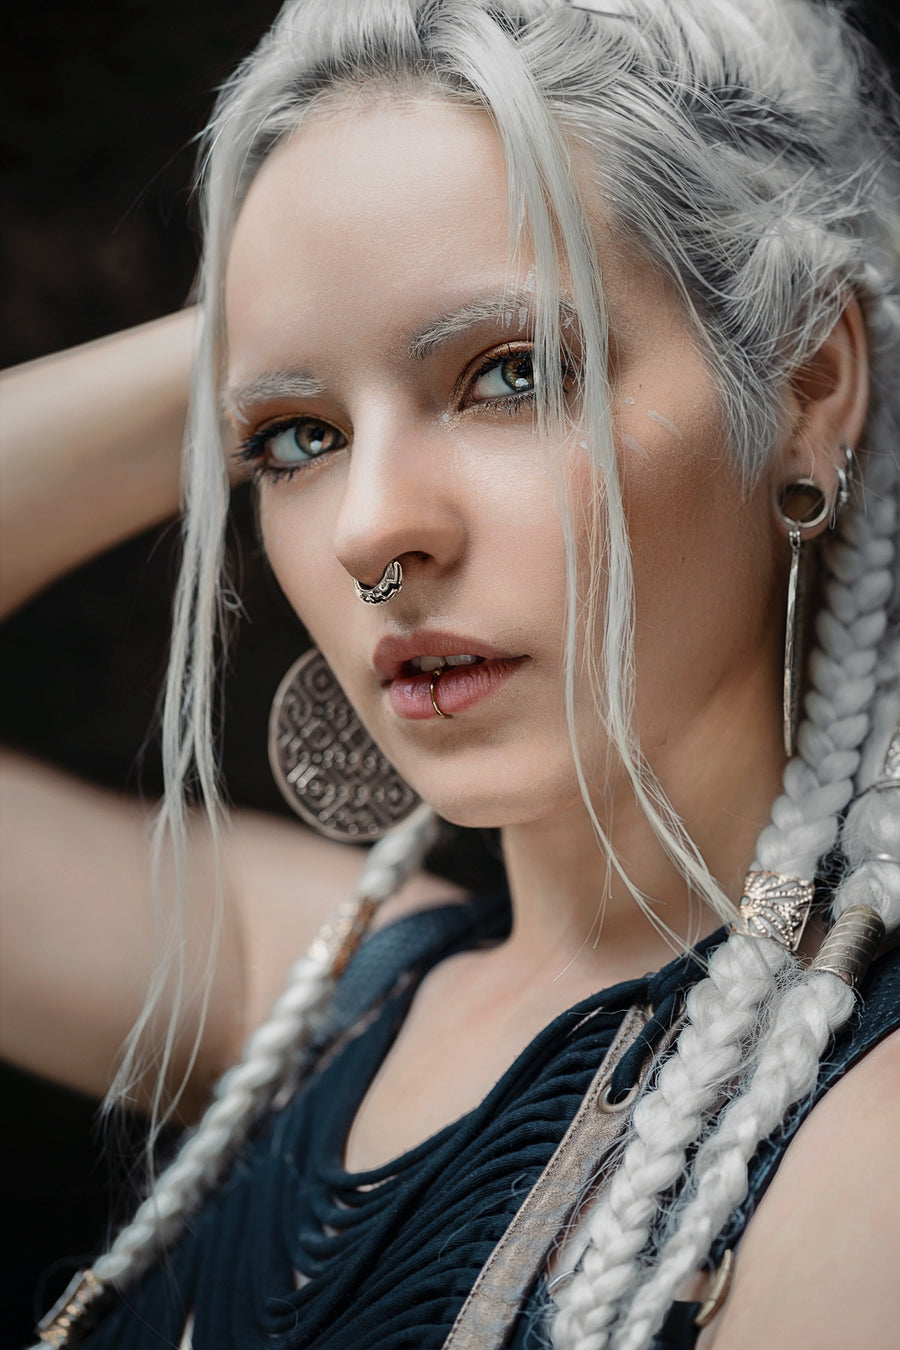 A portrait of a woman with silver braided hair and a serene expression, featuring Silver 925 Shipibo patterned earrings, nose, and lip piercings, creating a mystical and tribal ambiance.